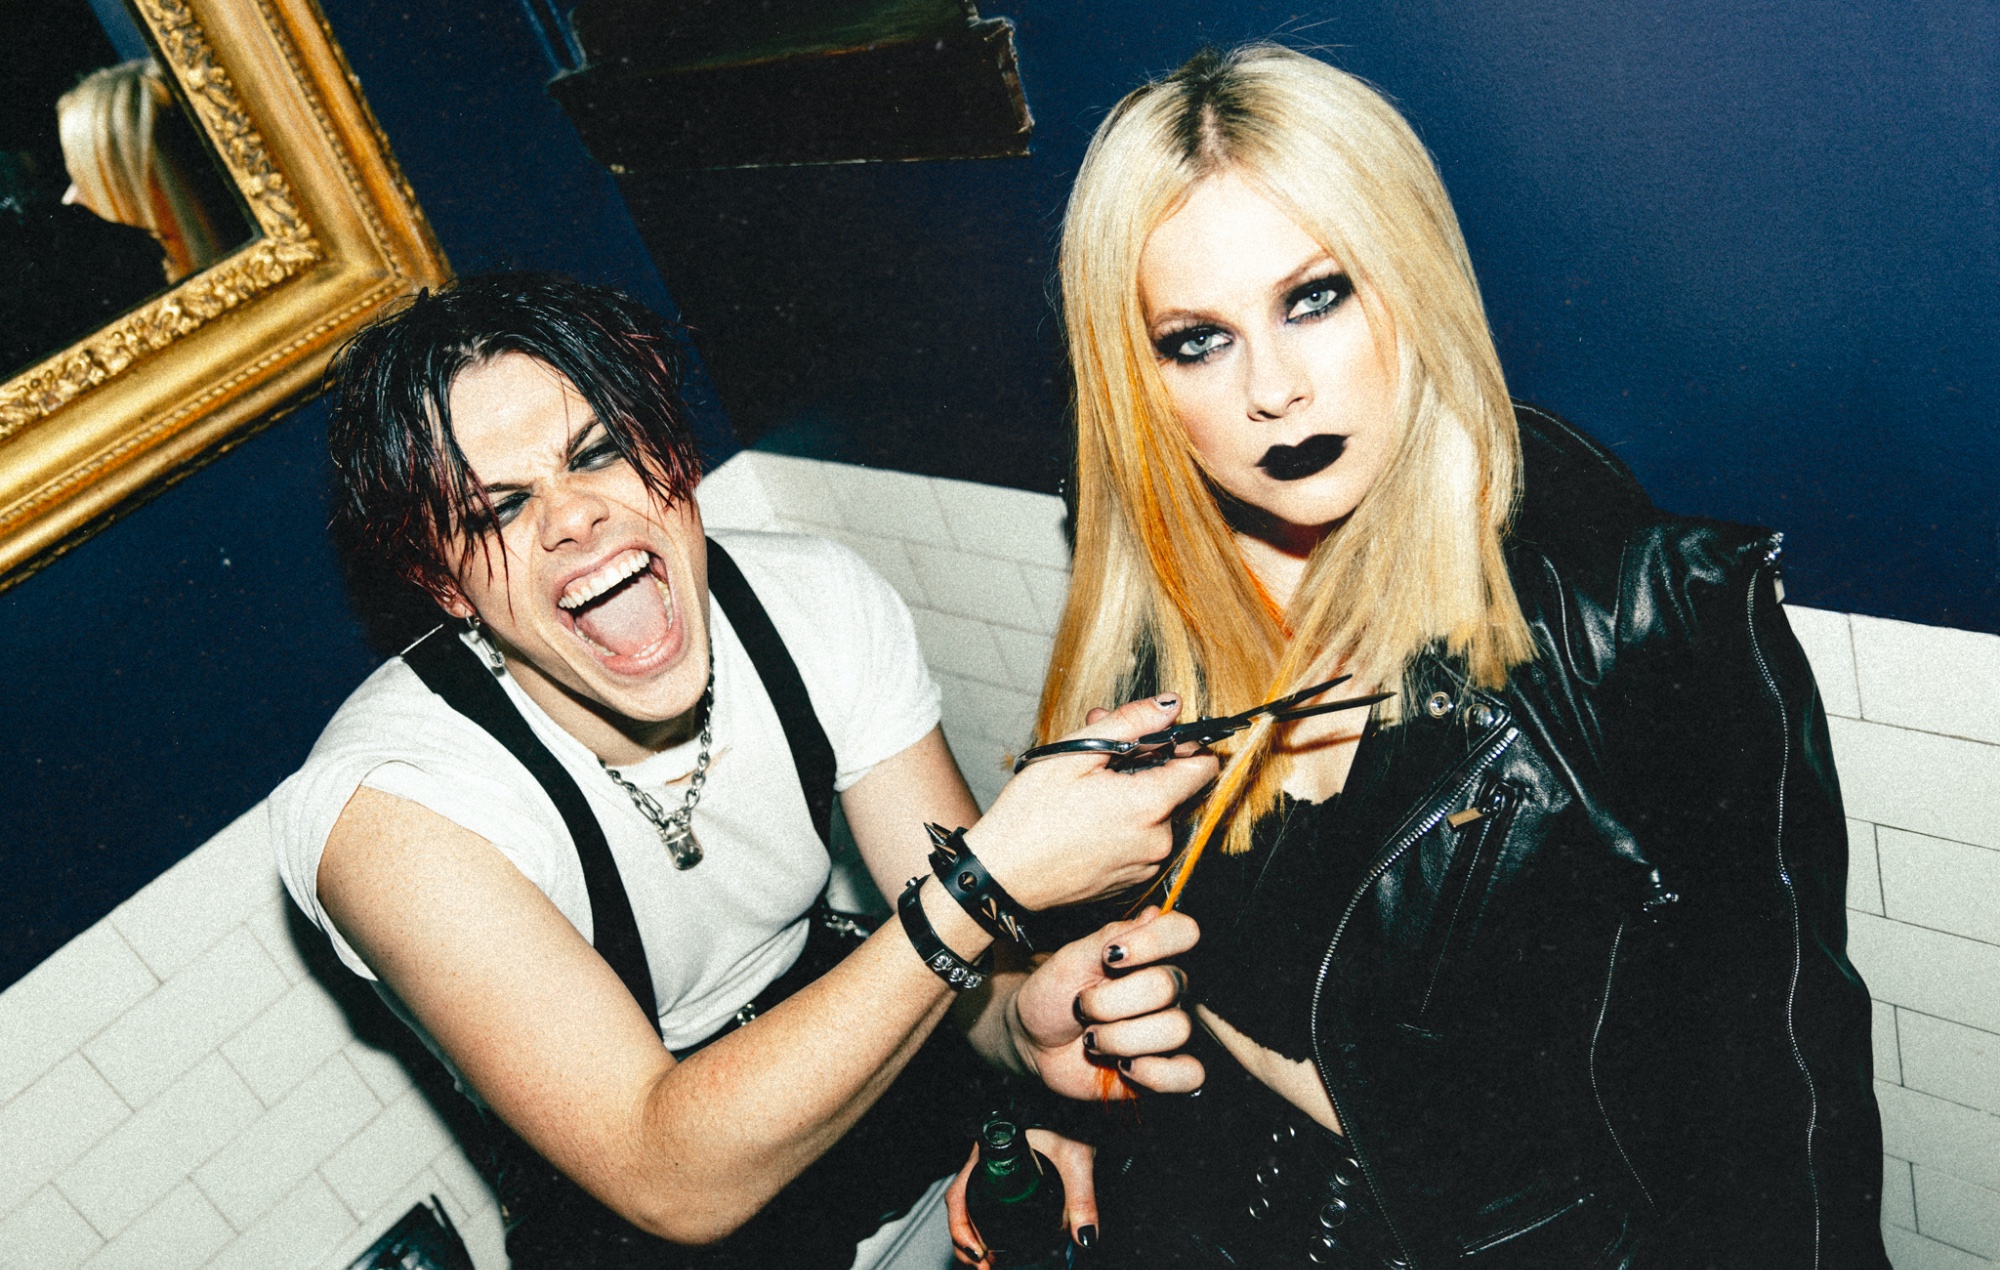 Avril Lavigne, Yungblud Team Up For New Track “I’m a Mess” The Rock